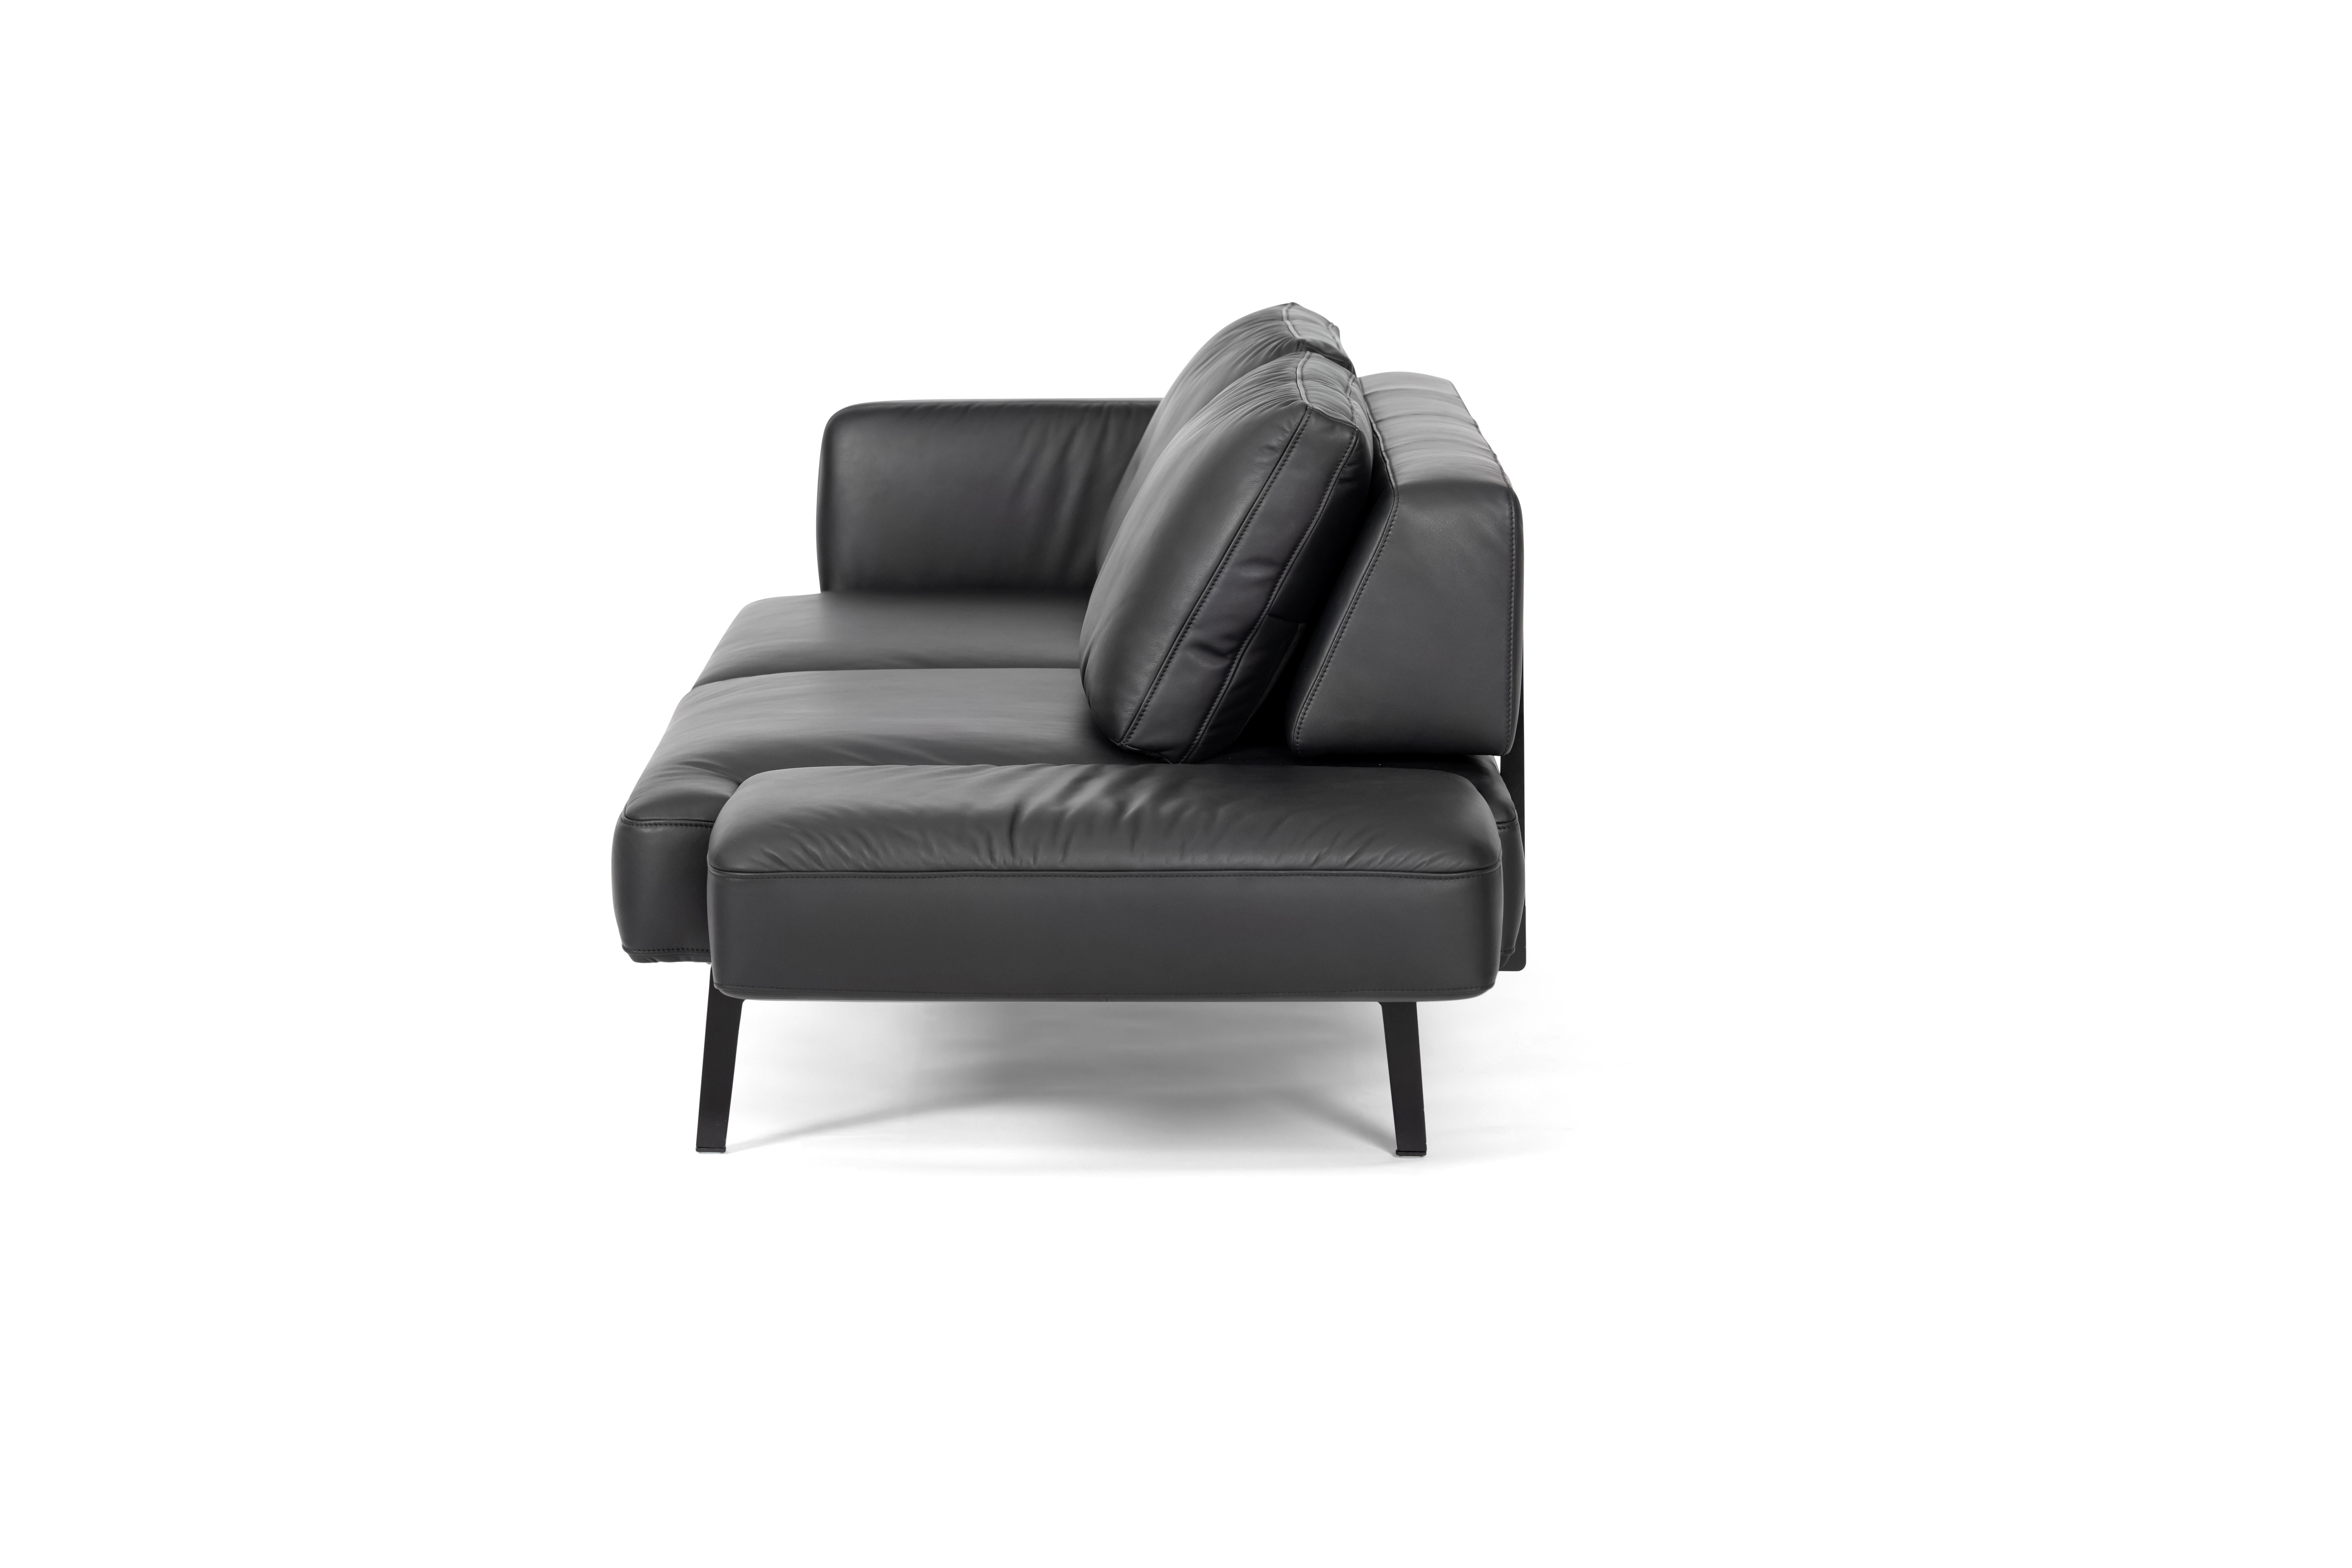 DeSede Ds-747/04 Multifunctional Sofa in Black Leather Seat and Back Upholstery For Sale 2